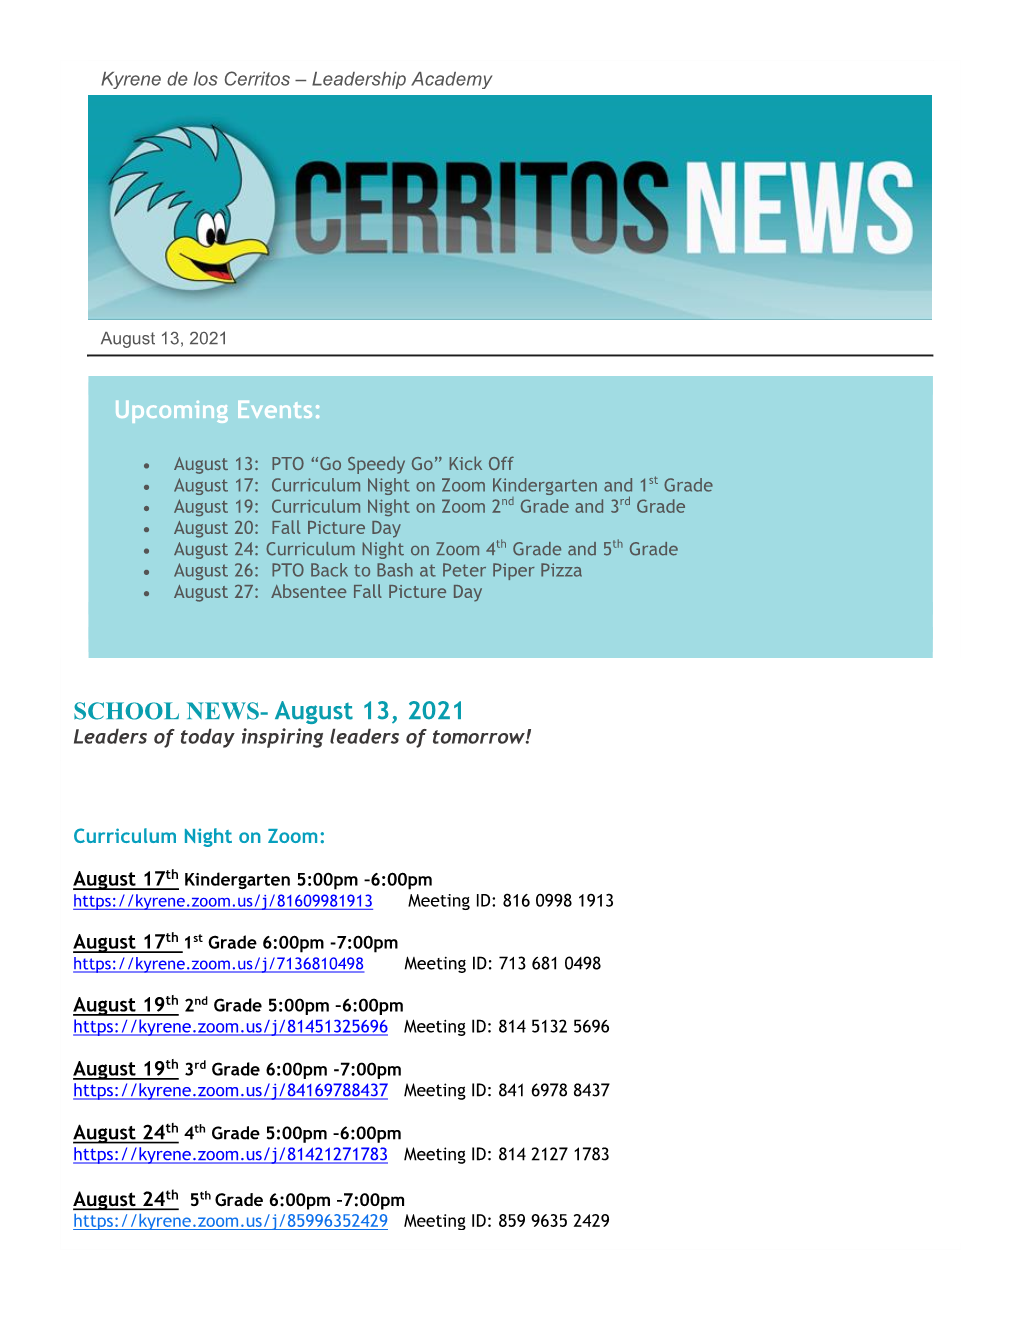 Upcoming Events: SCHOOL NEWS- August 13, 2021